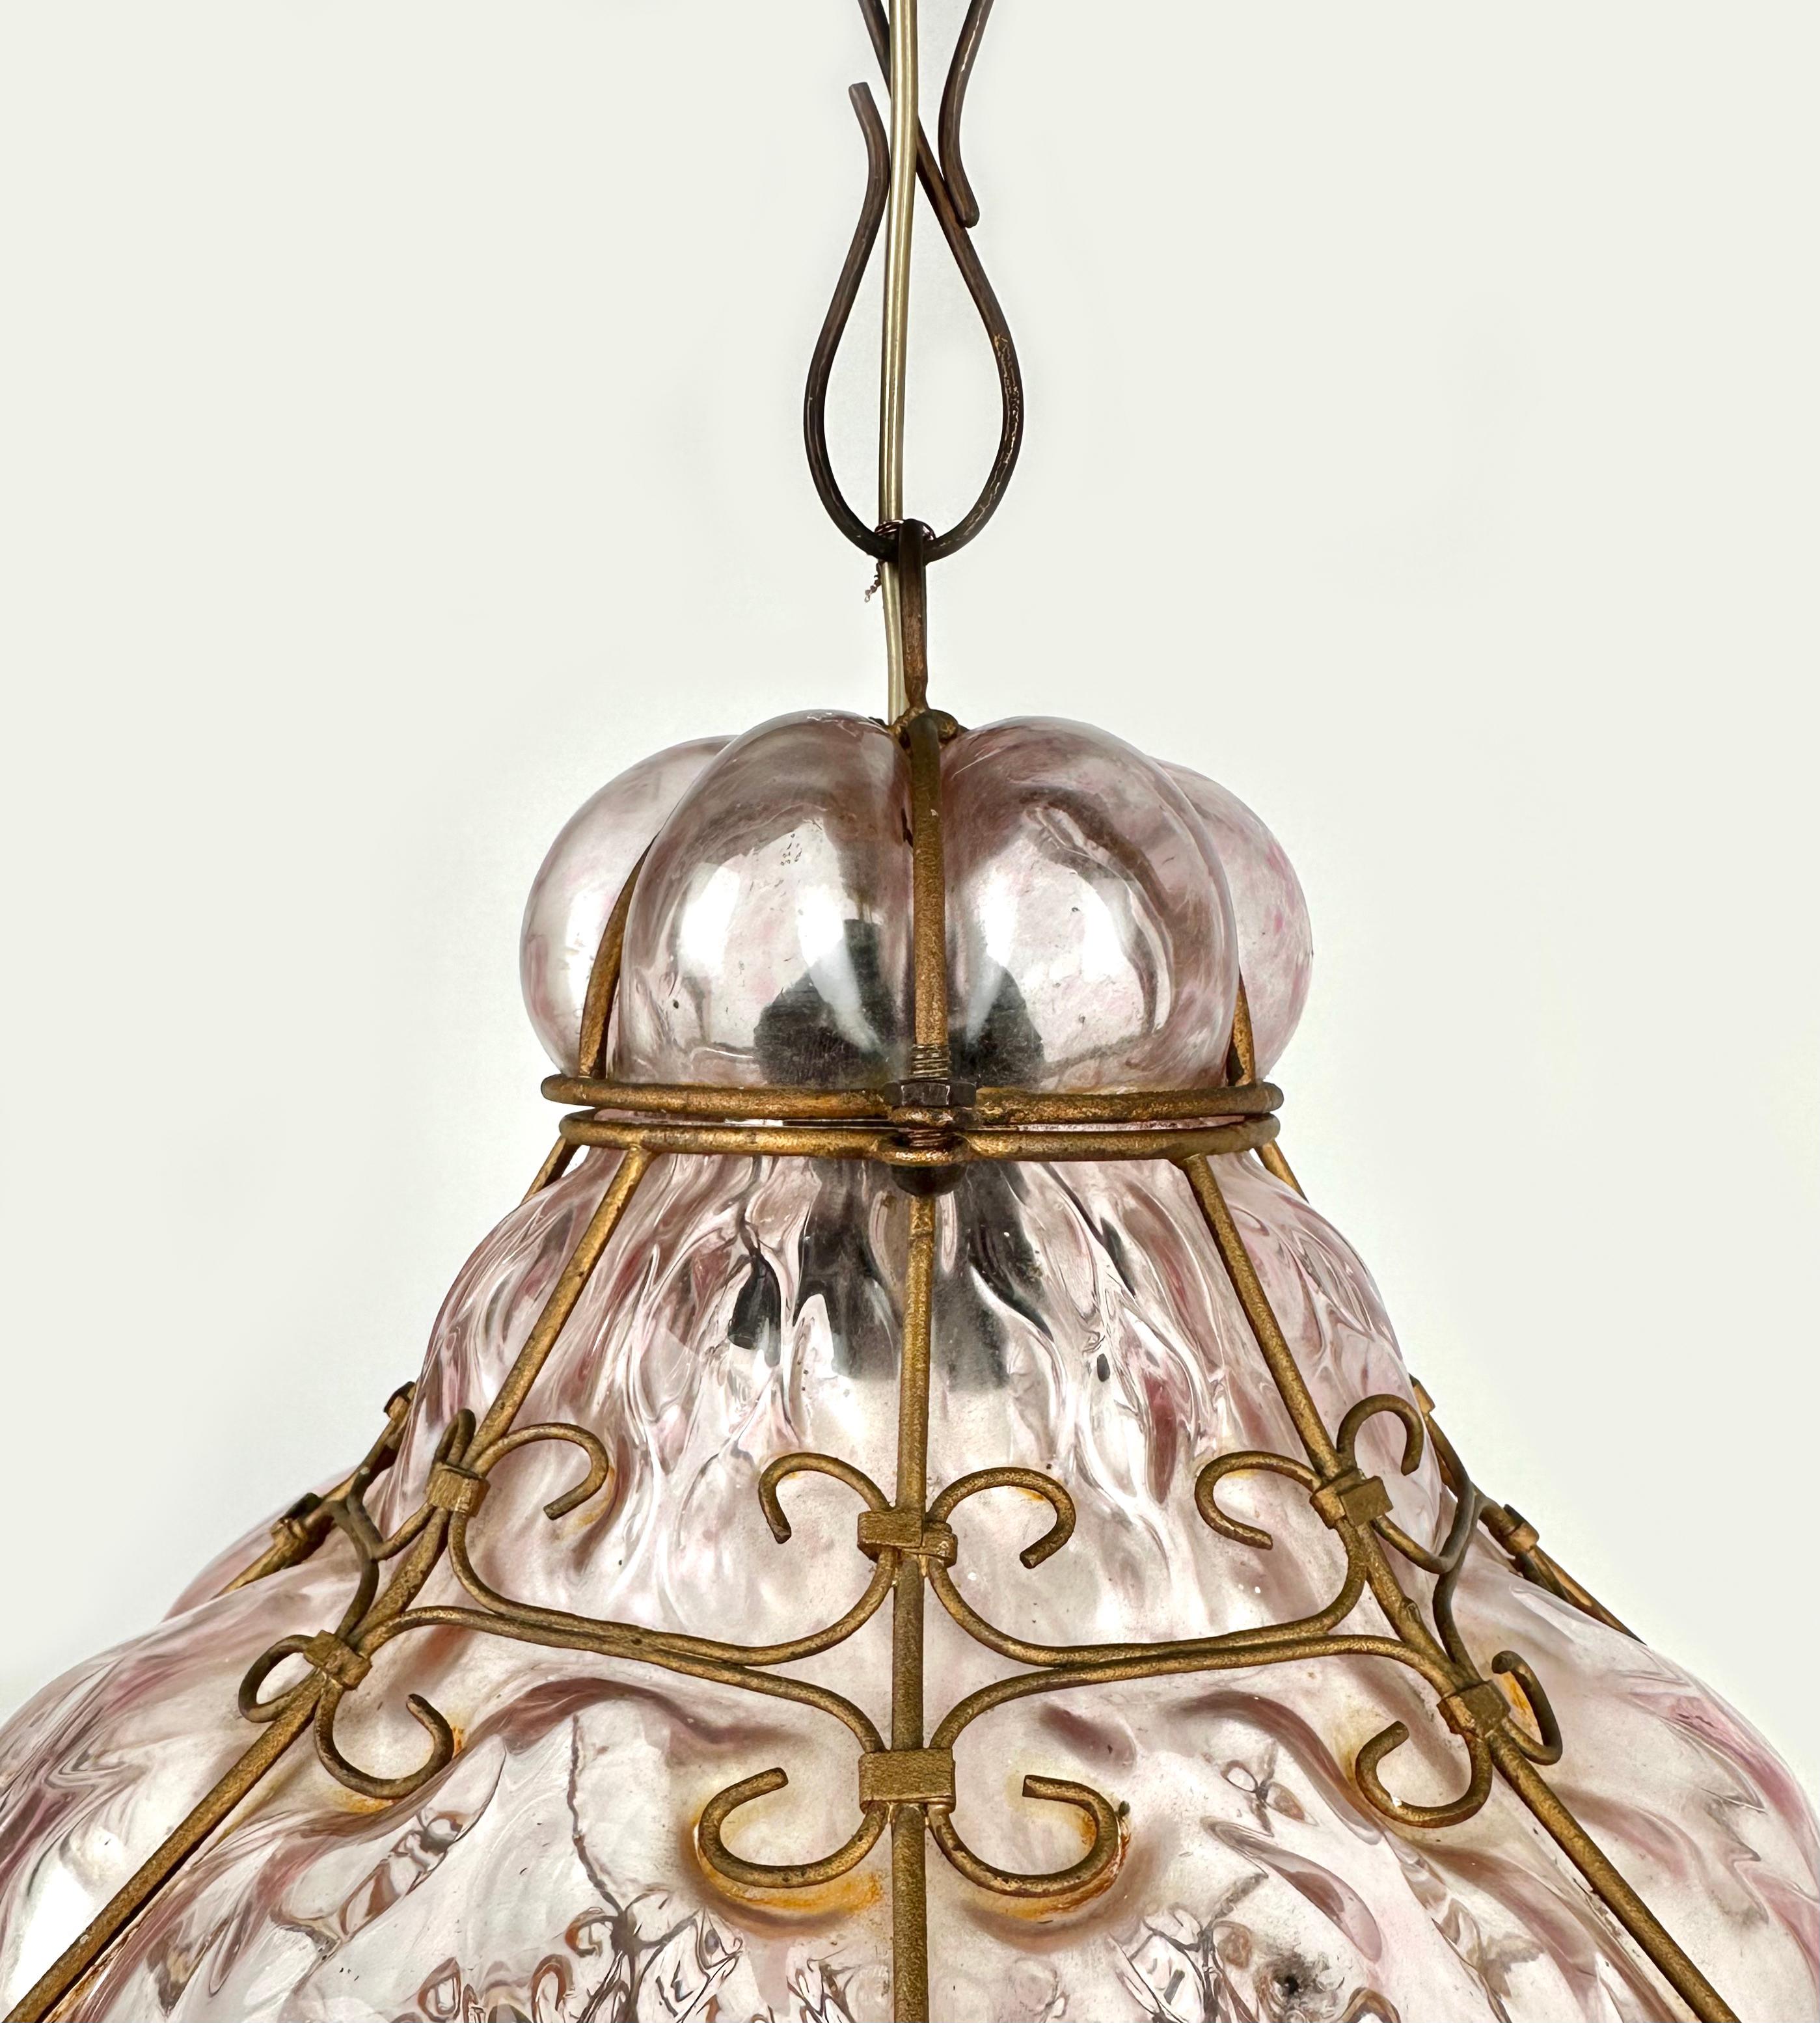 Midcentury Handblown Murano Pink Glass Pendant Light by Seguso, Italy, 1940s For Sale 3